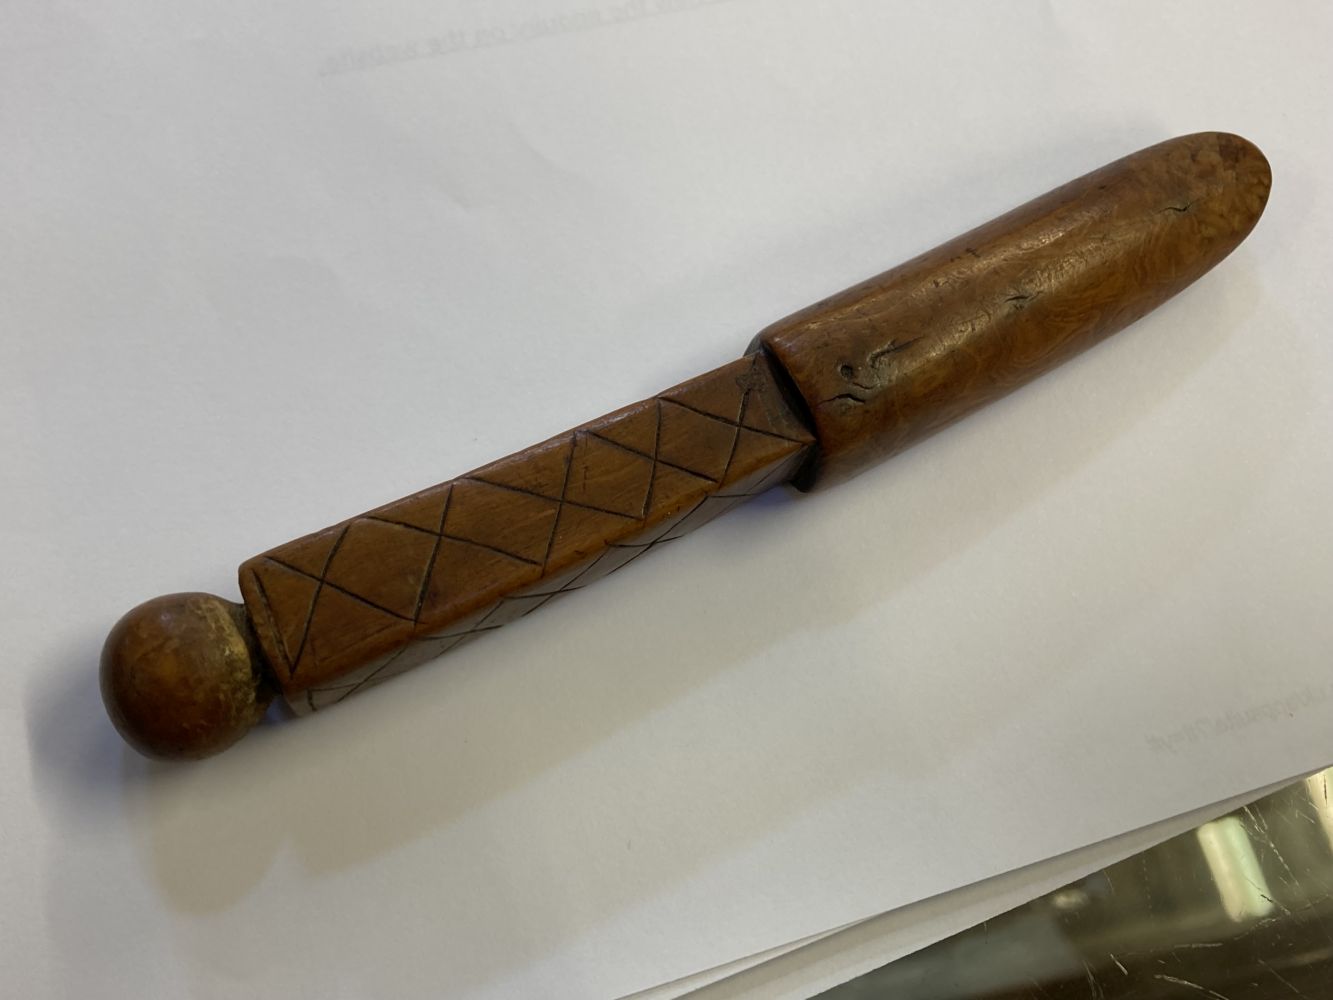 Treen. A 17th century treen apple corer dated 1696 - Image 6 of 10